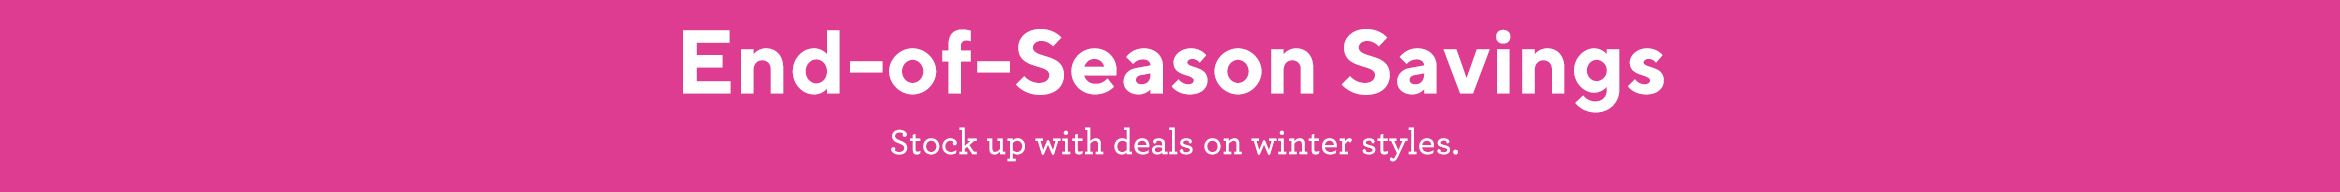 End-of-Season Stock up with deals on winter styles.